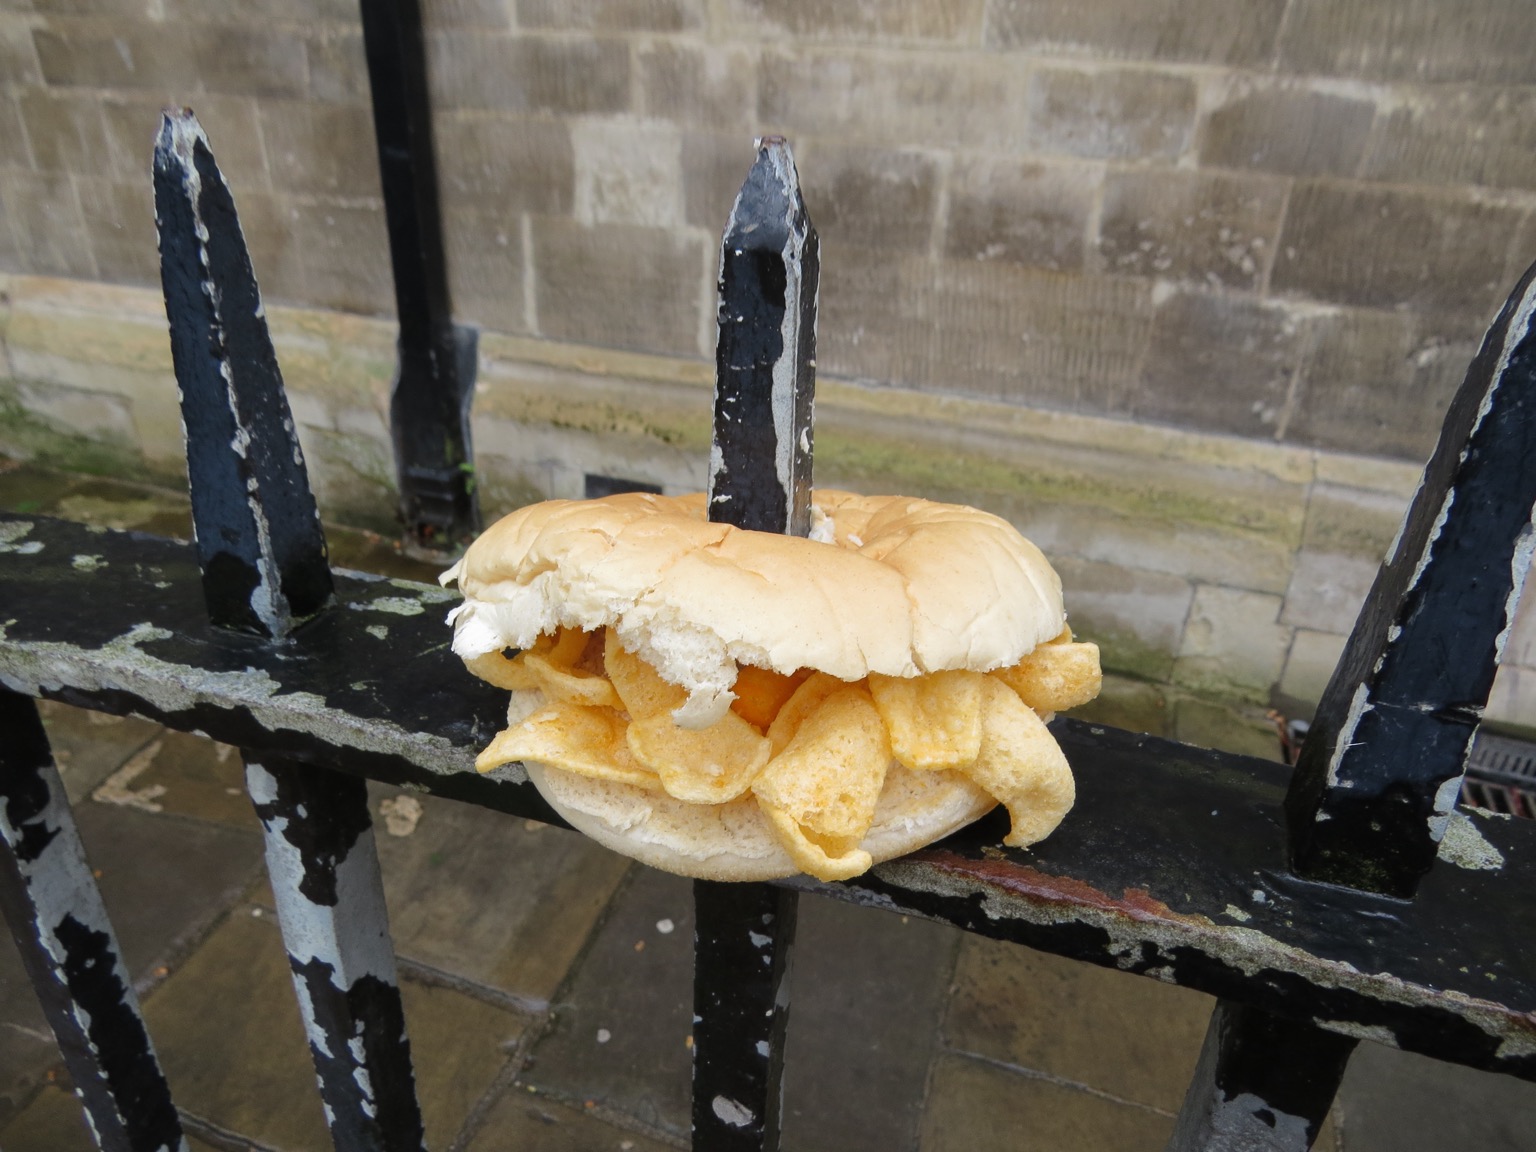 White Quavers-filled roll impaled on railings